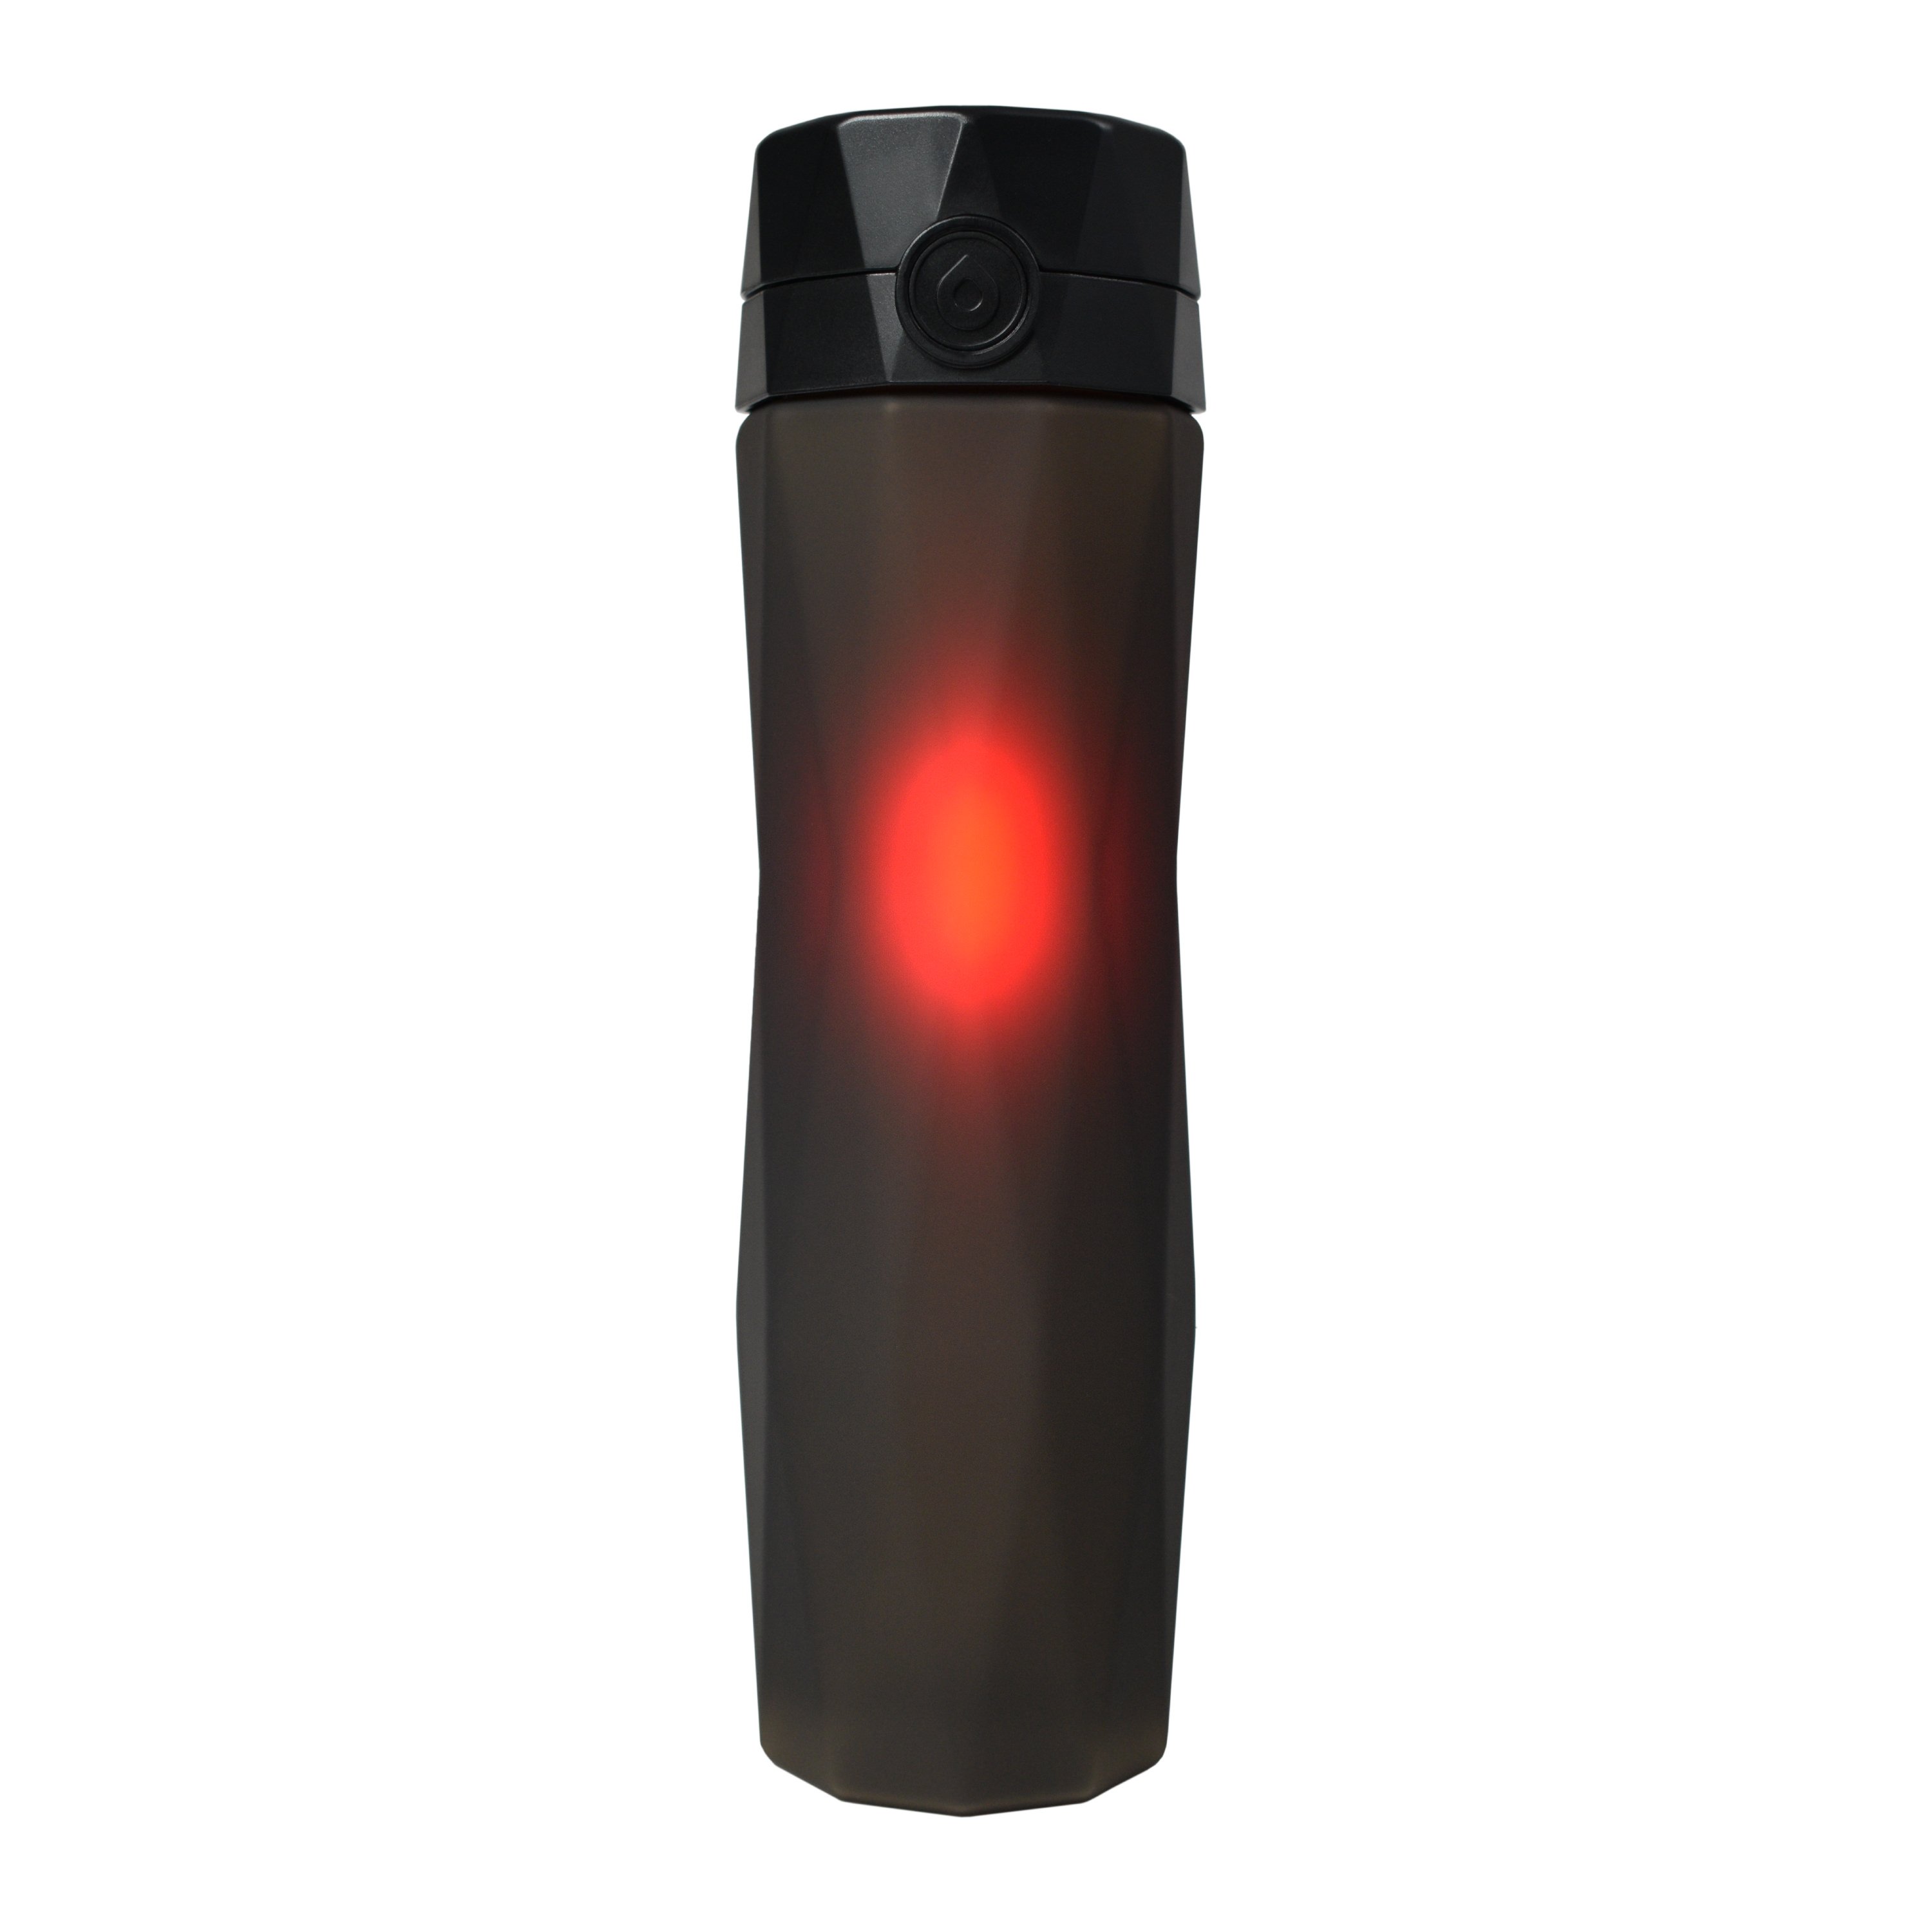 Hidratespark 2.0 Smart 24 oz Black and red Plastic Water Bottle with Wide Mouth and Flip-Top Lid - image 1 of 3